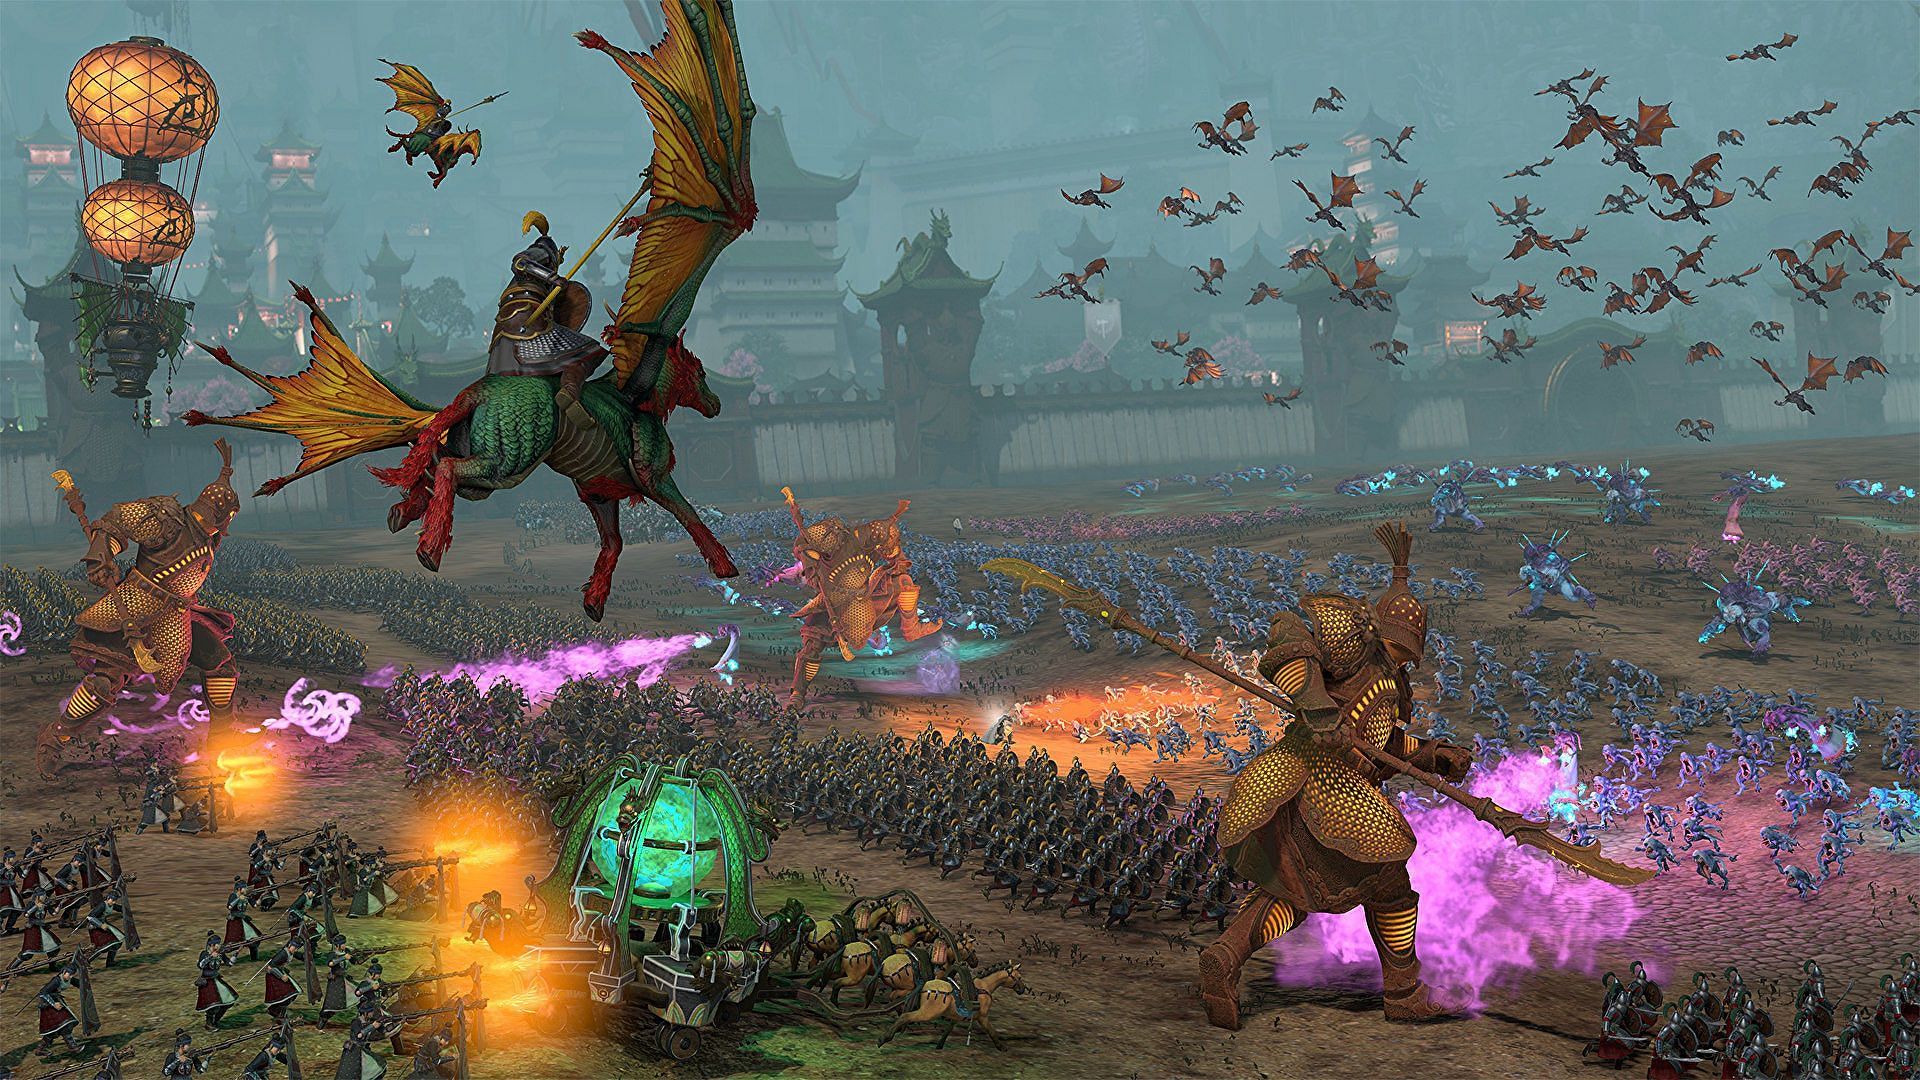 Players of Total War: Warhammer 3 have tons of troops and tactics at their disposal (Image via Creative Assembly)